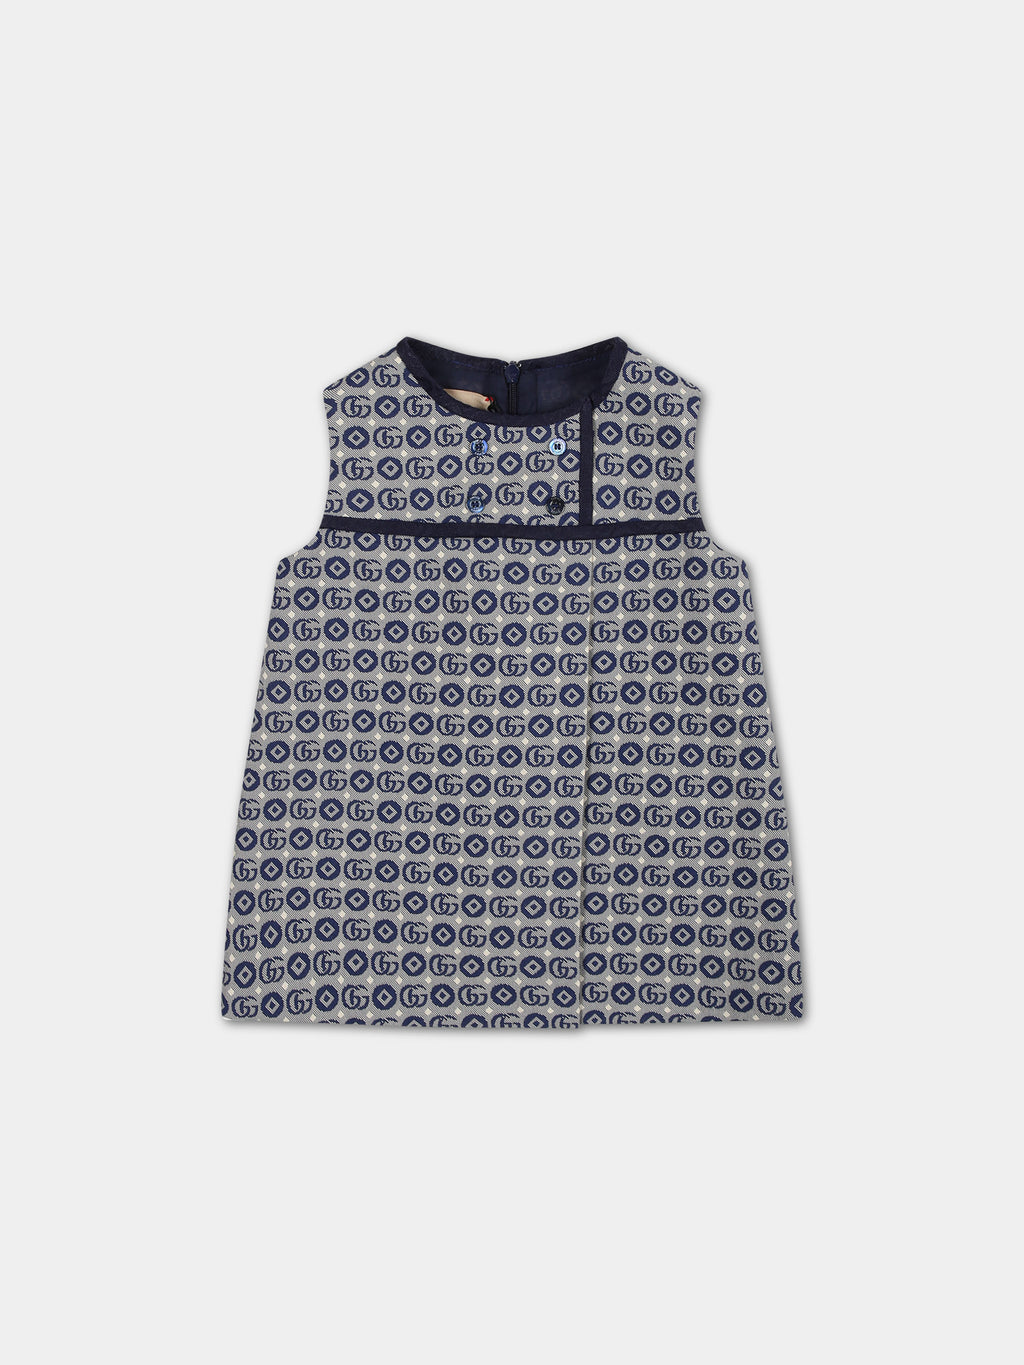 Blue dress for baby girl with all-over GG geometric pattern